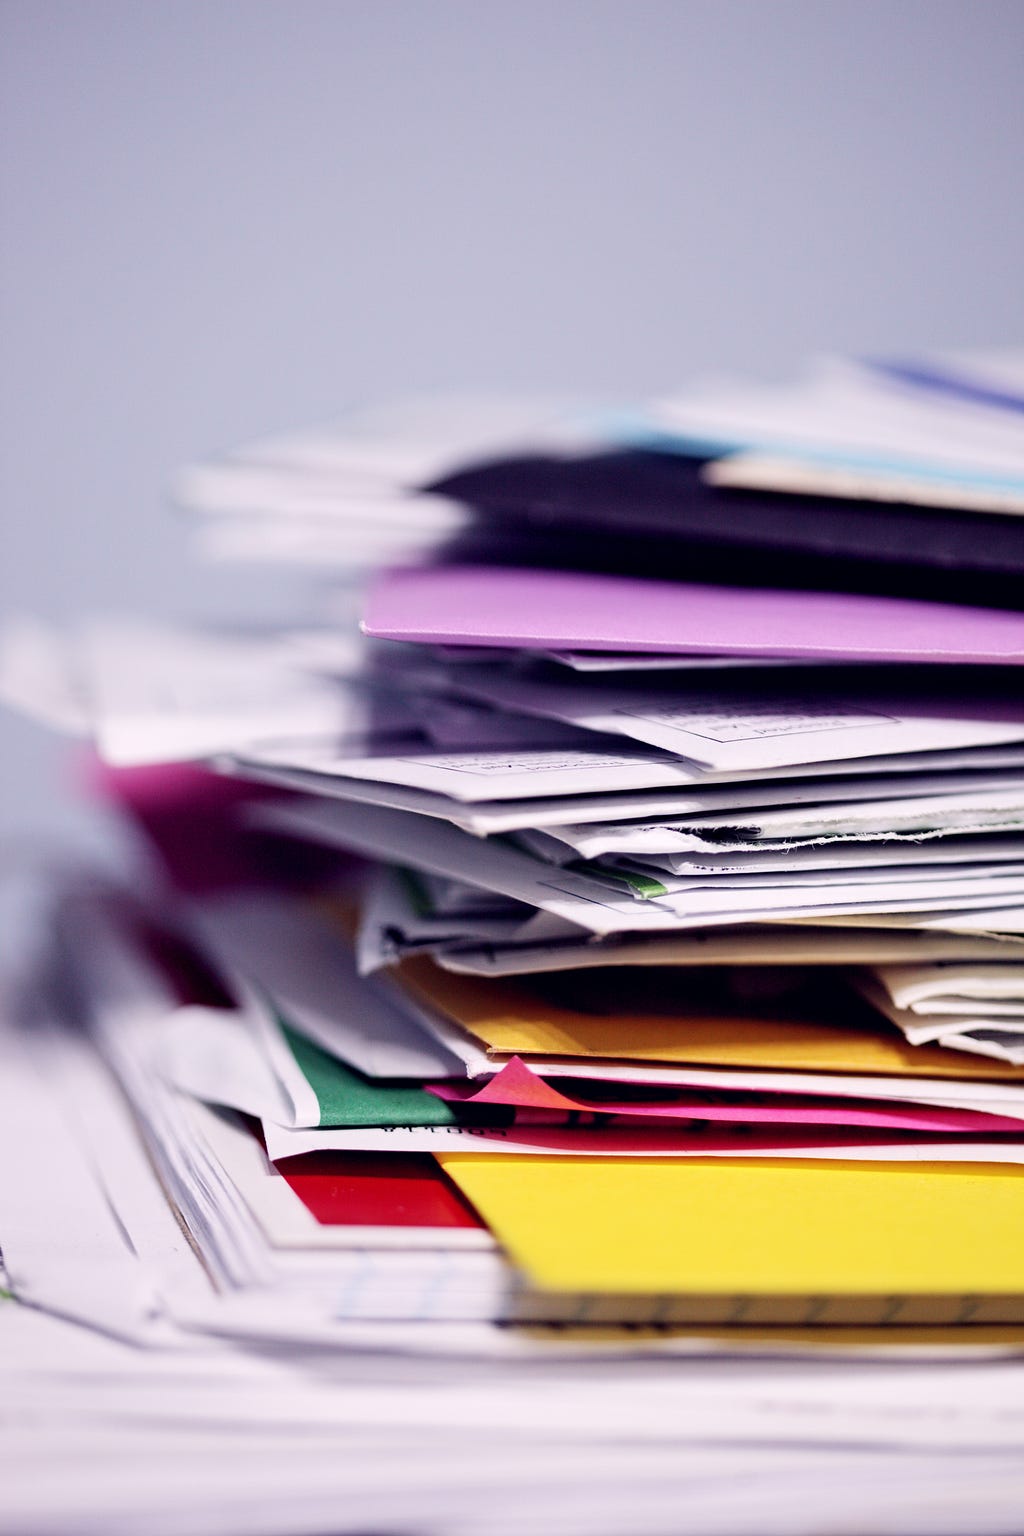 Paper files of different colours stacked disorderly